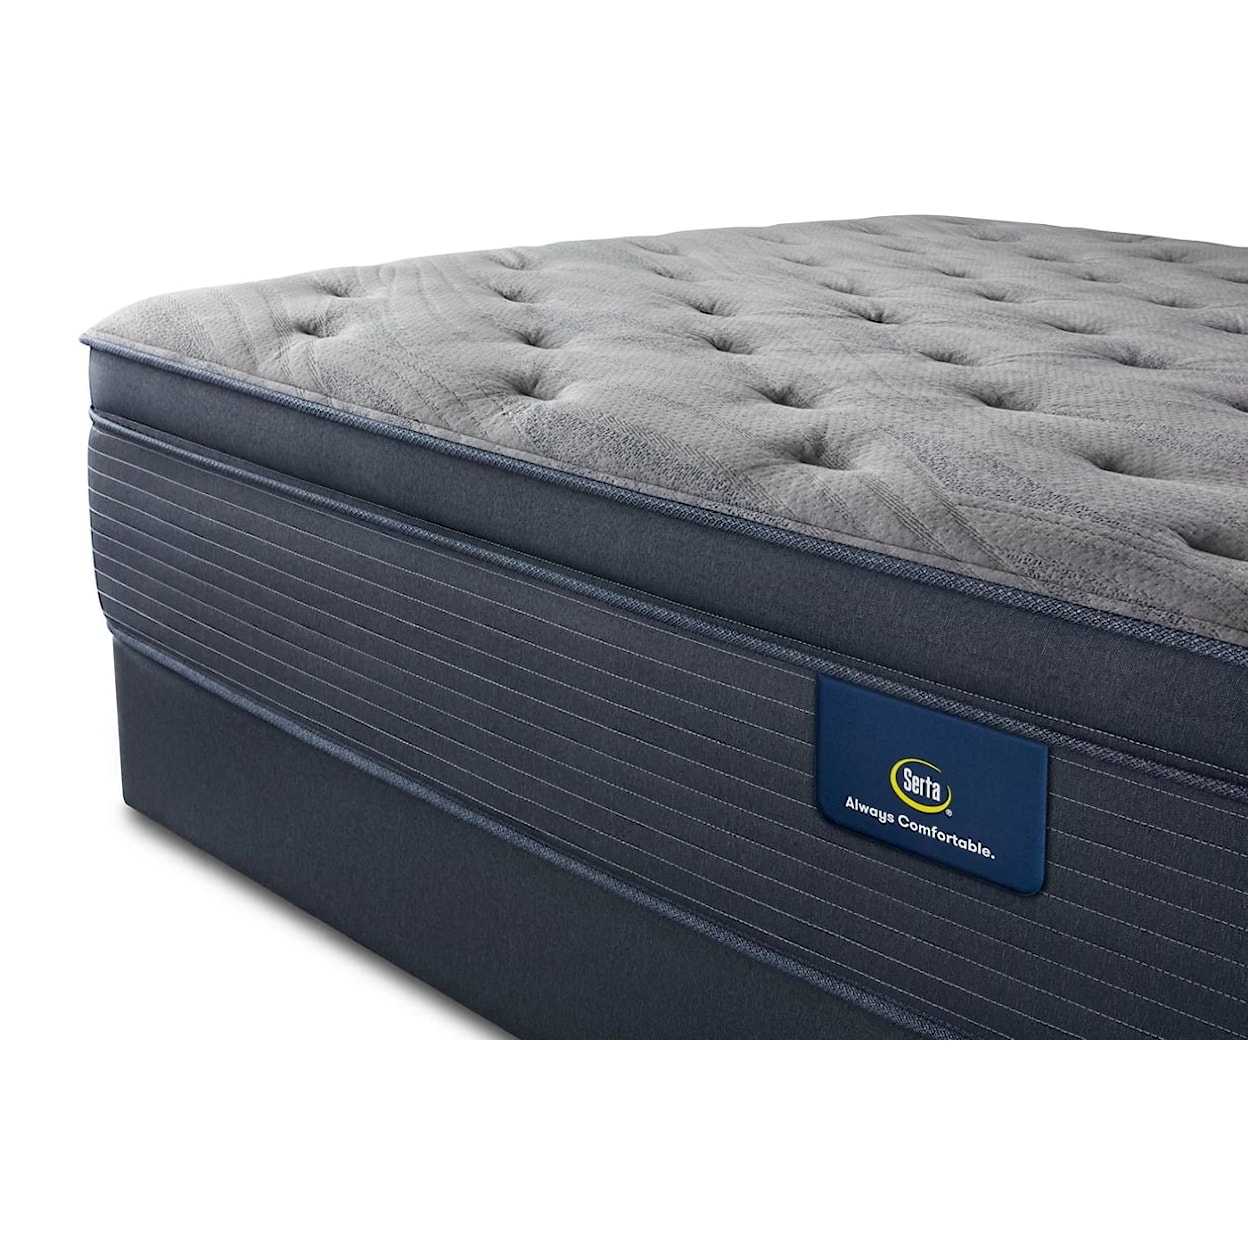 Serta Soothing Rest Soothing Rest Plush Pillow Top Twin Mattress